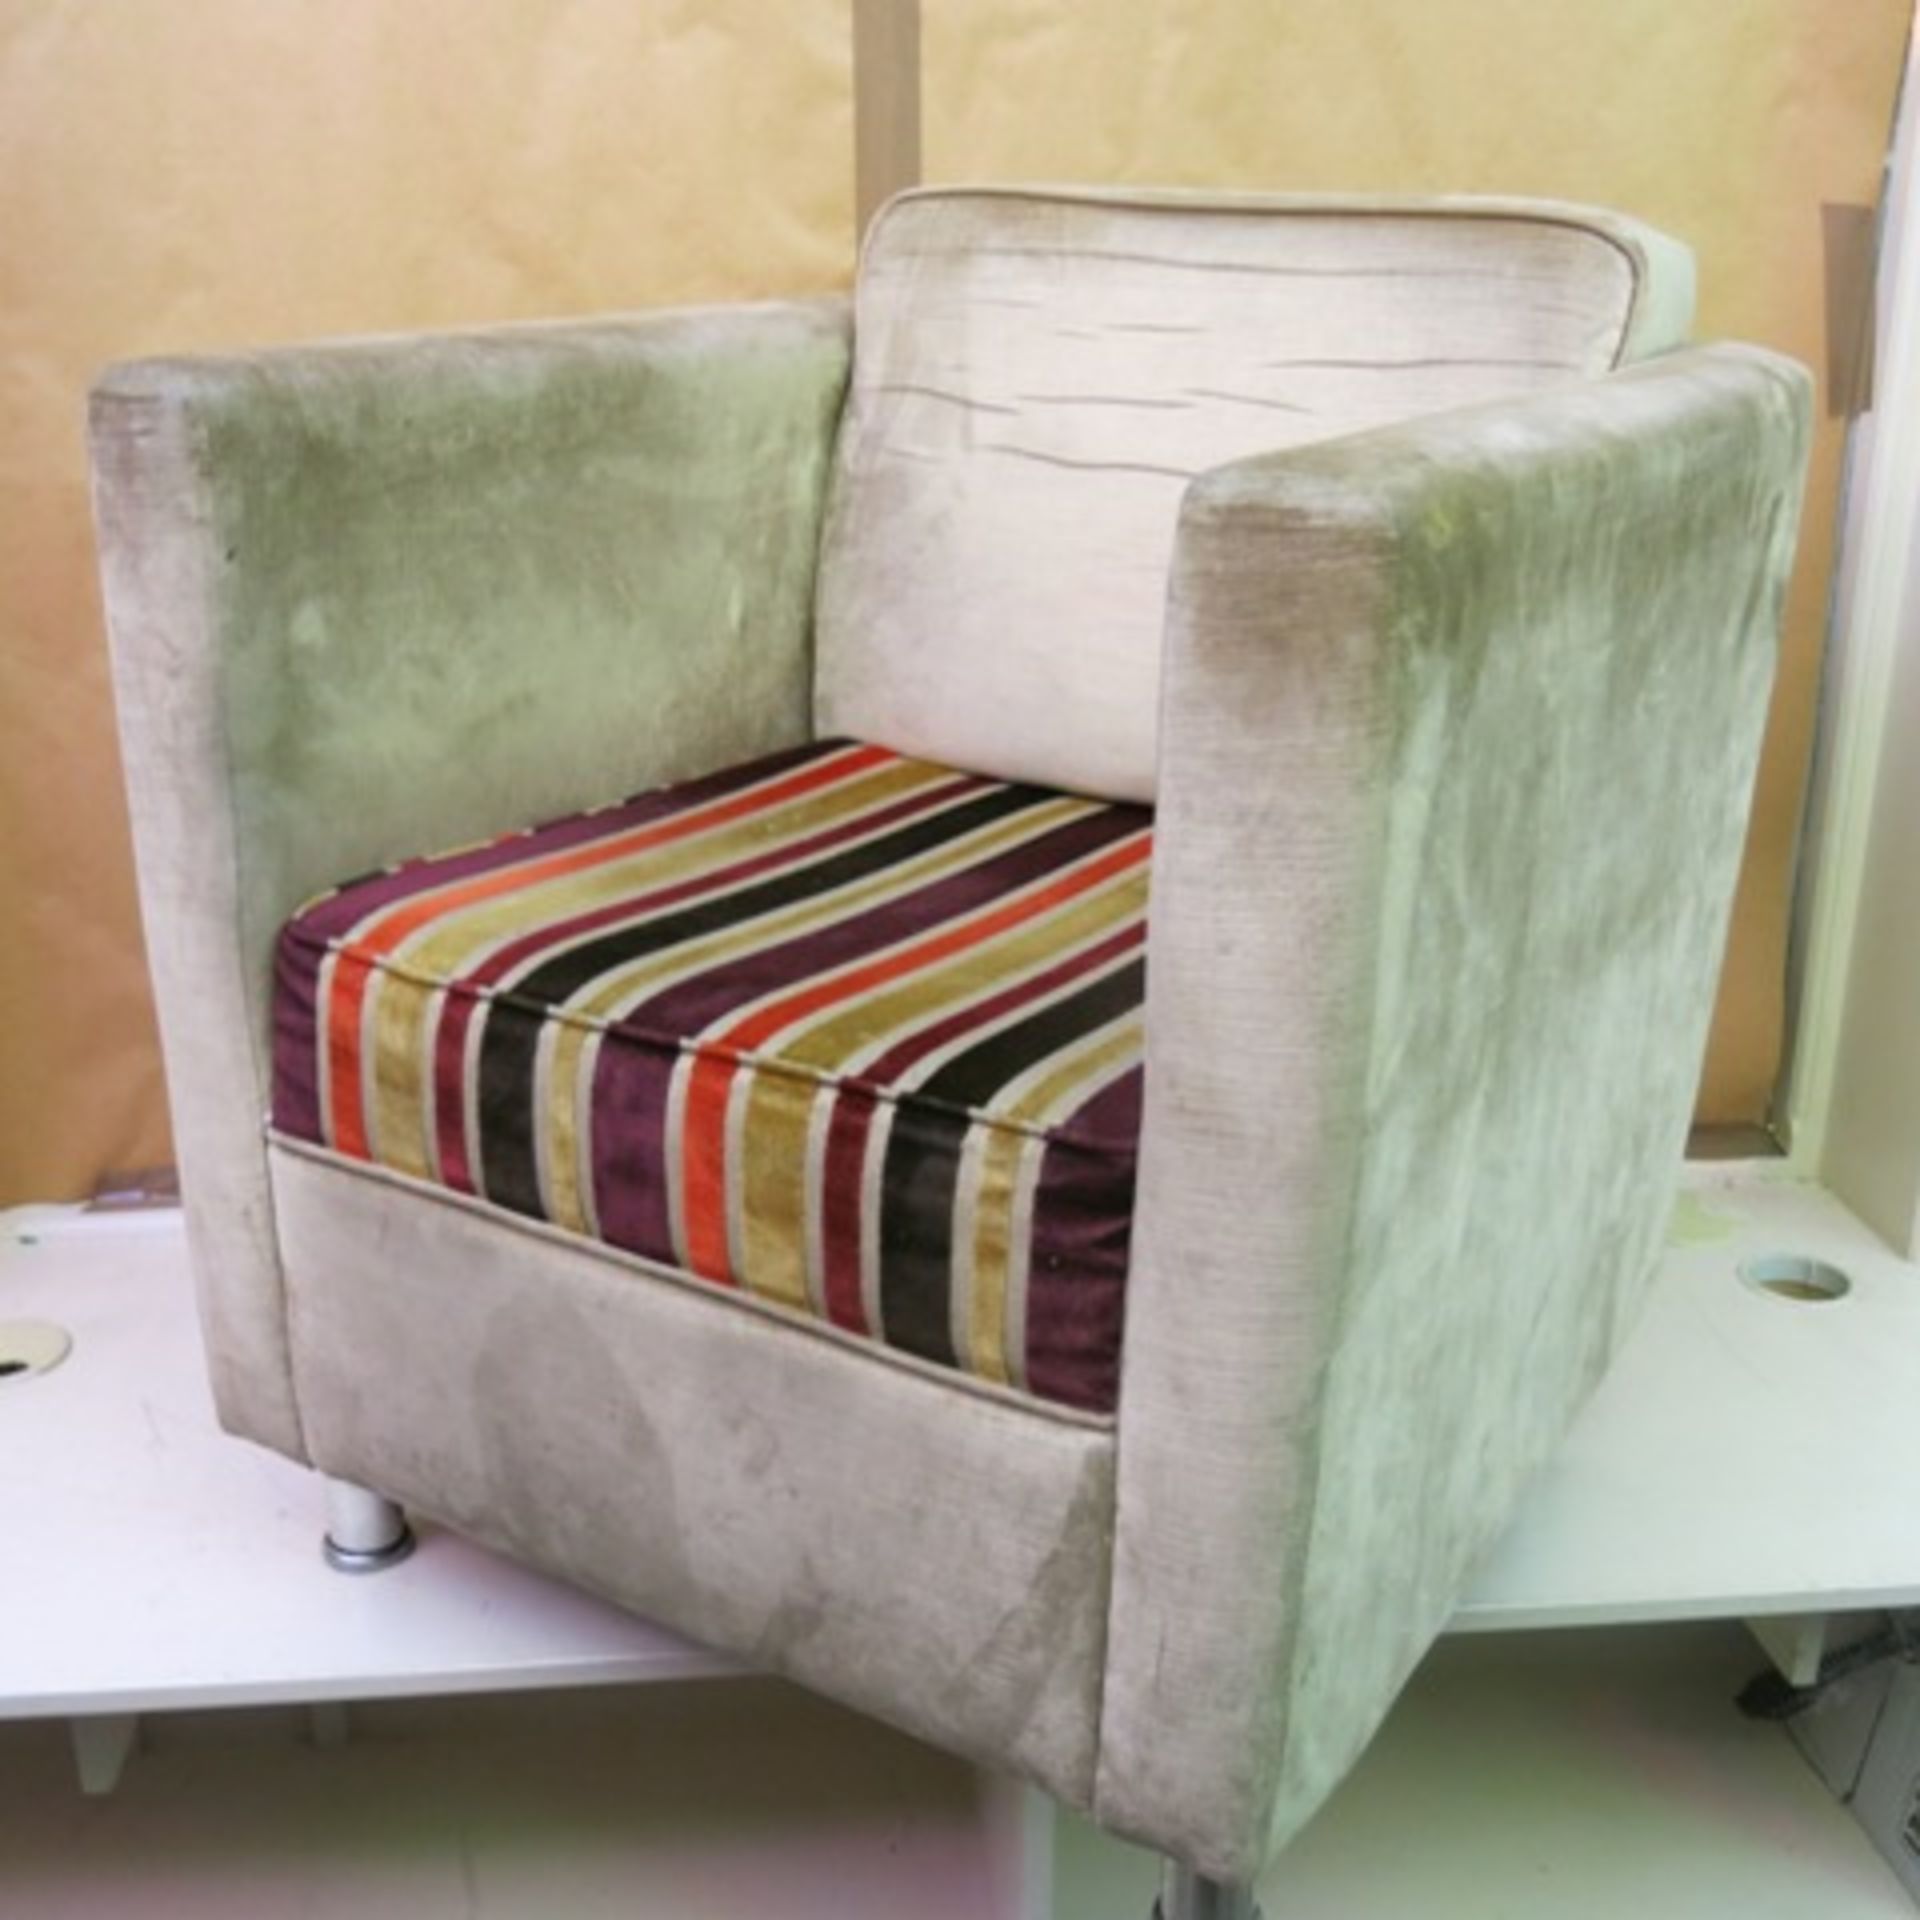 2 x Armchairs Upholstered in Multi-coloured Fabric on Metal Legs - Image 9 of 10